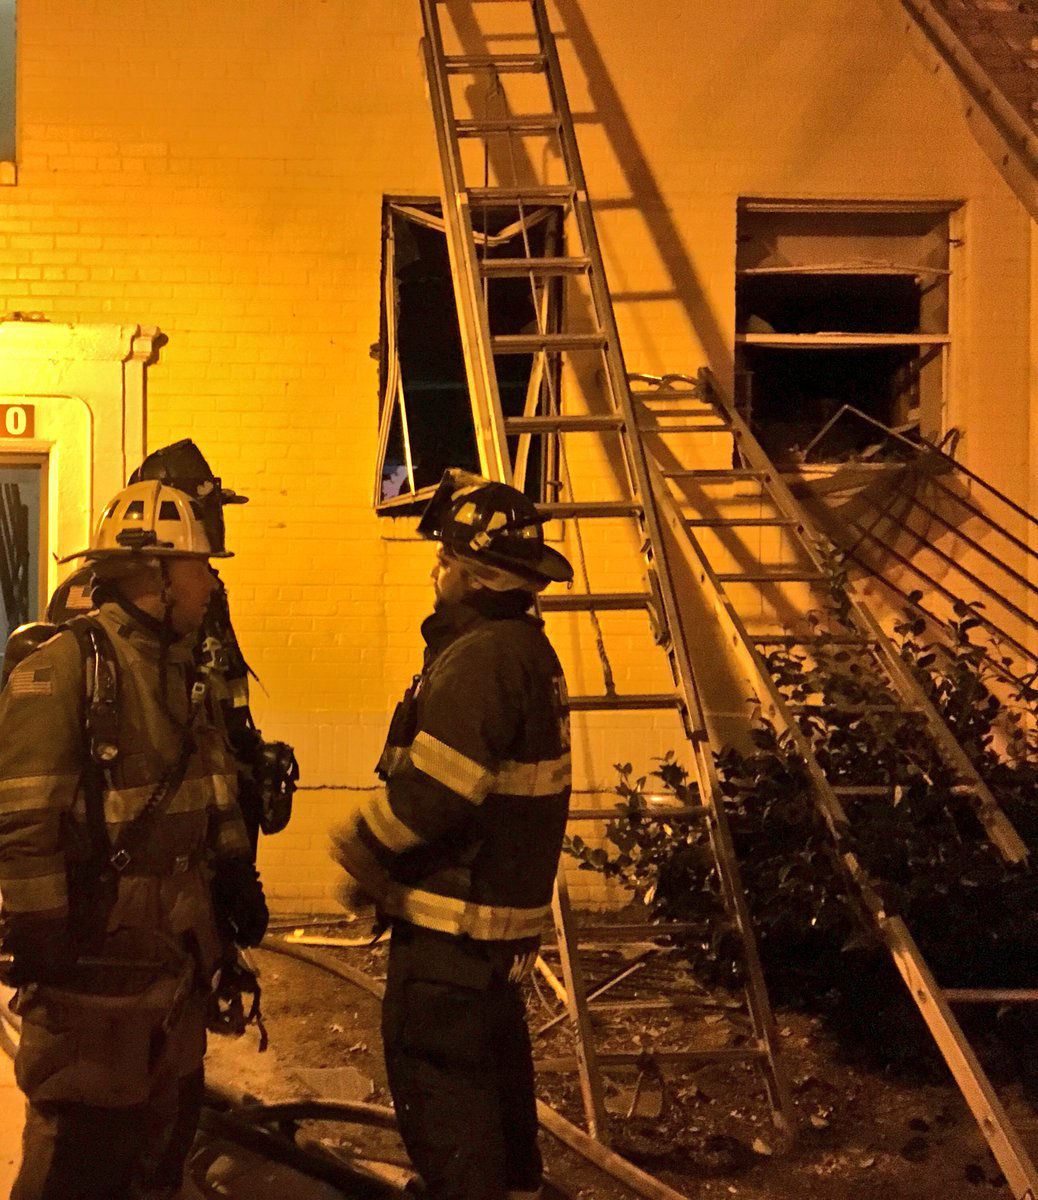 The woman rescued from the apartment had critical, life-threatening injuries. Another woman was also taken to the hospital for evaluation. A firefighter was also injured and taken to the hospital, but D.C. Fire described the injuries as "not serious." (Courtesy D.C. Fire and EMS)